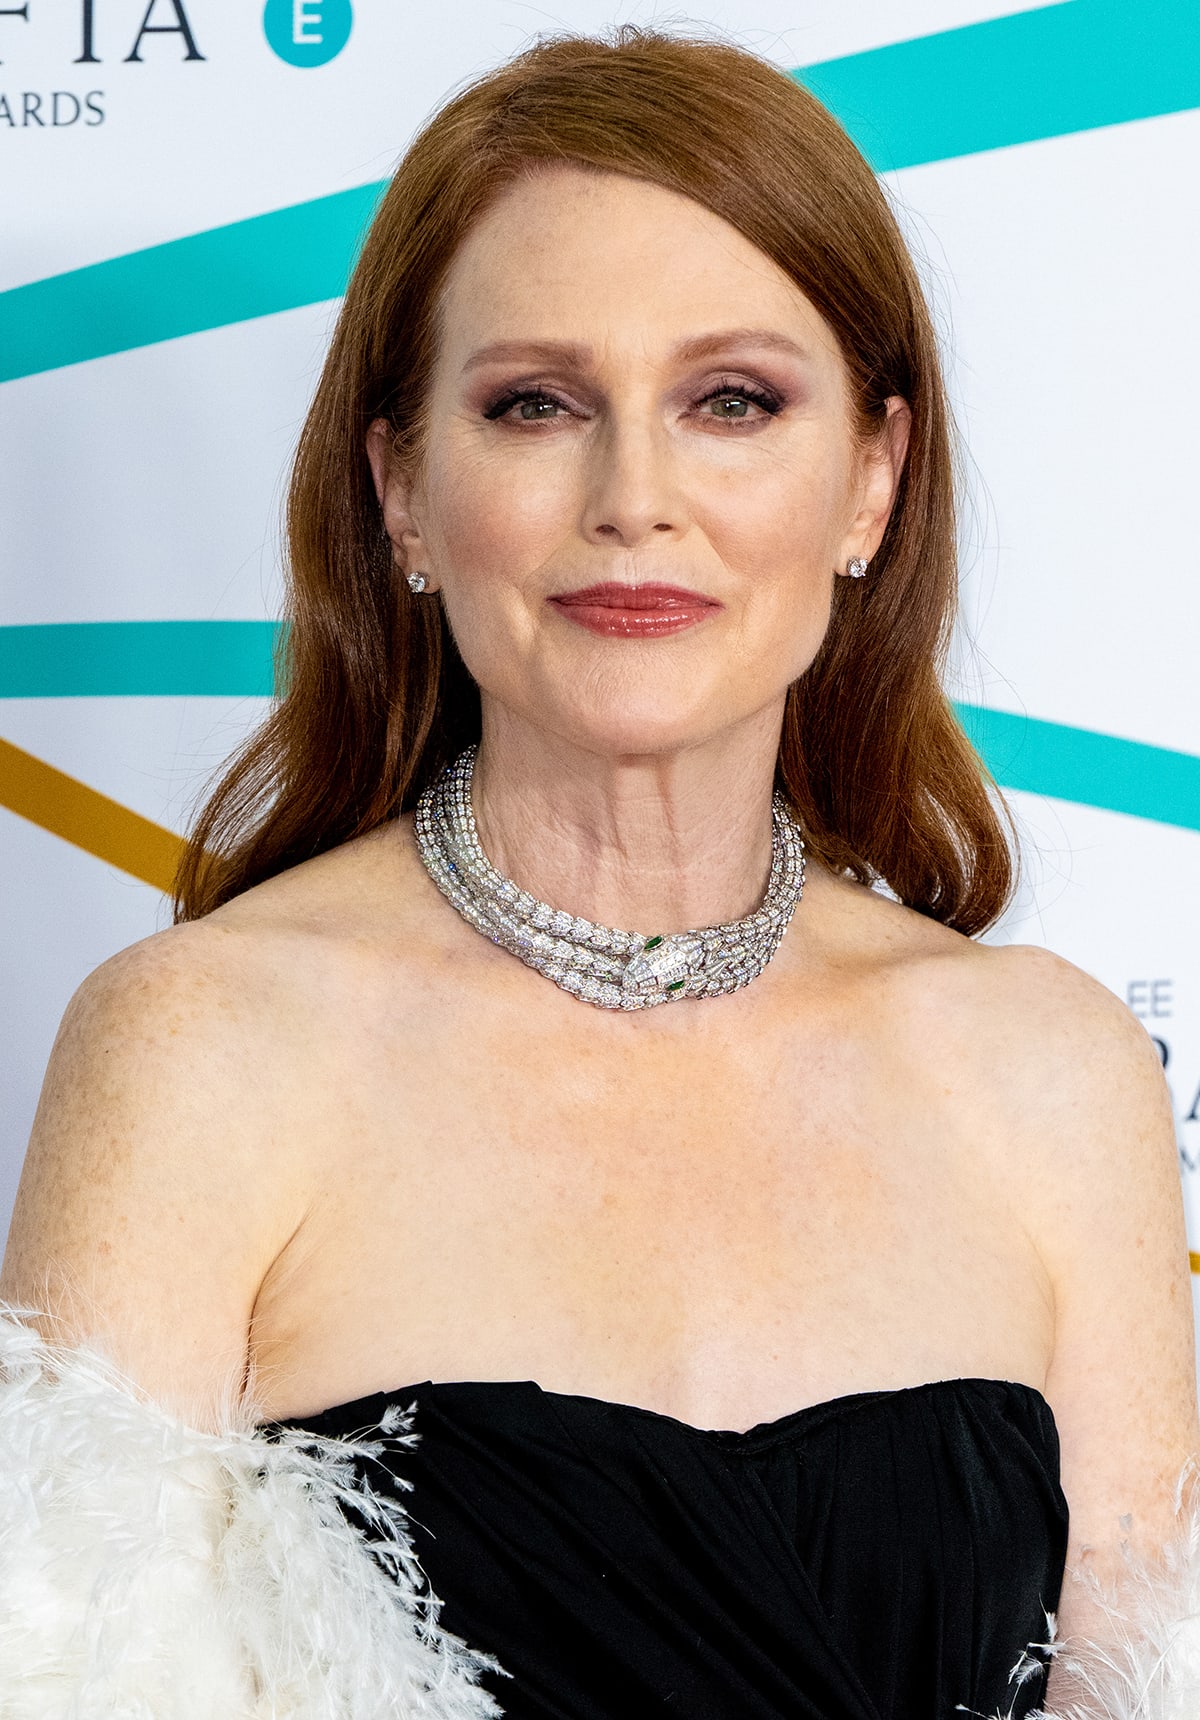 Julianne Moore wears her tresses in side-parted waves with glamorous makeup that highlights her eyes